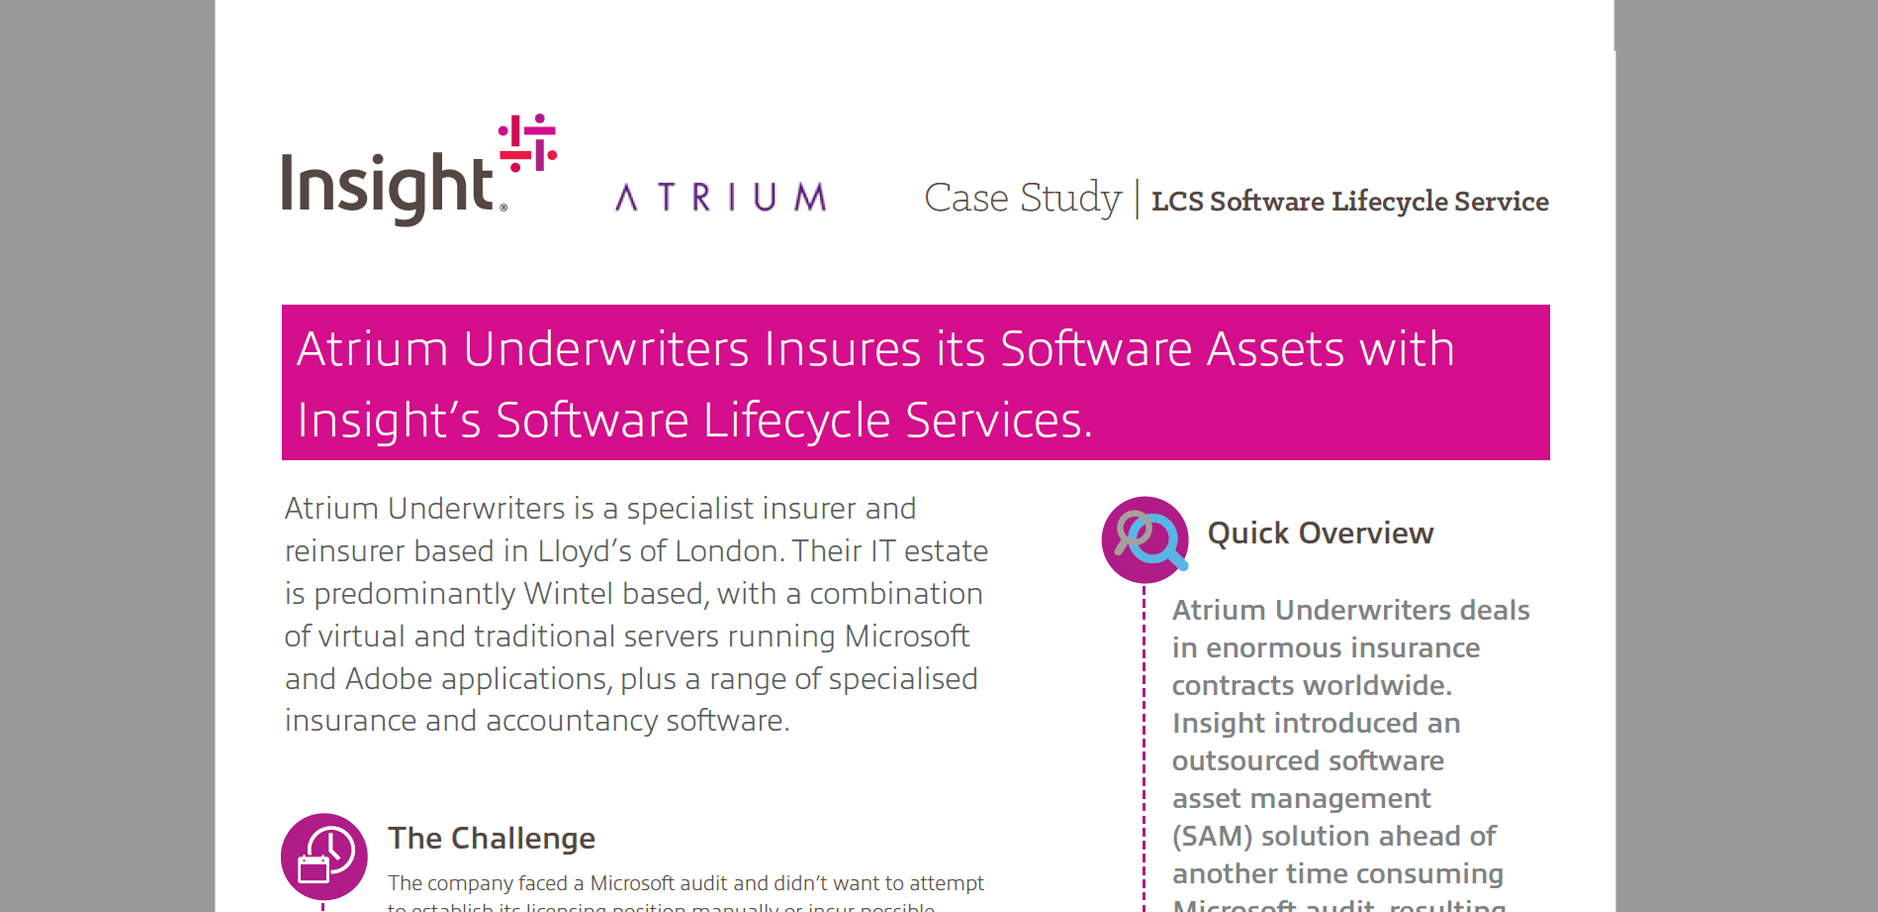 Article Atrium: Save time and reduce costs with an outsourced SAM solution Image